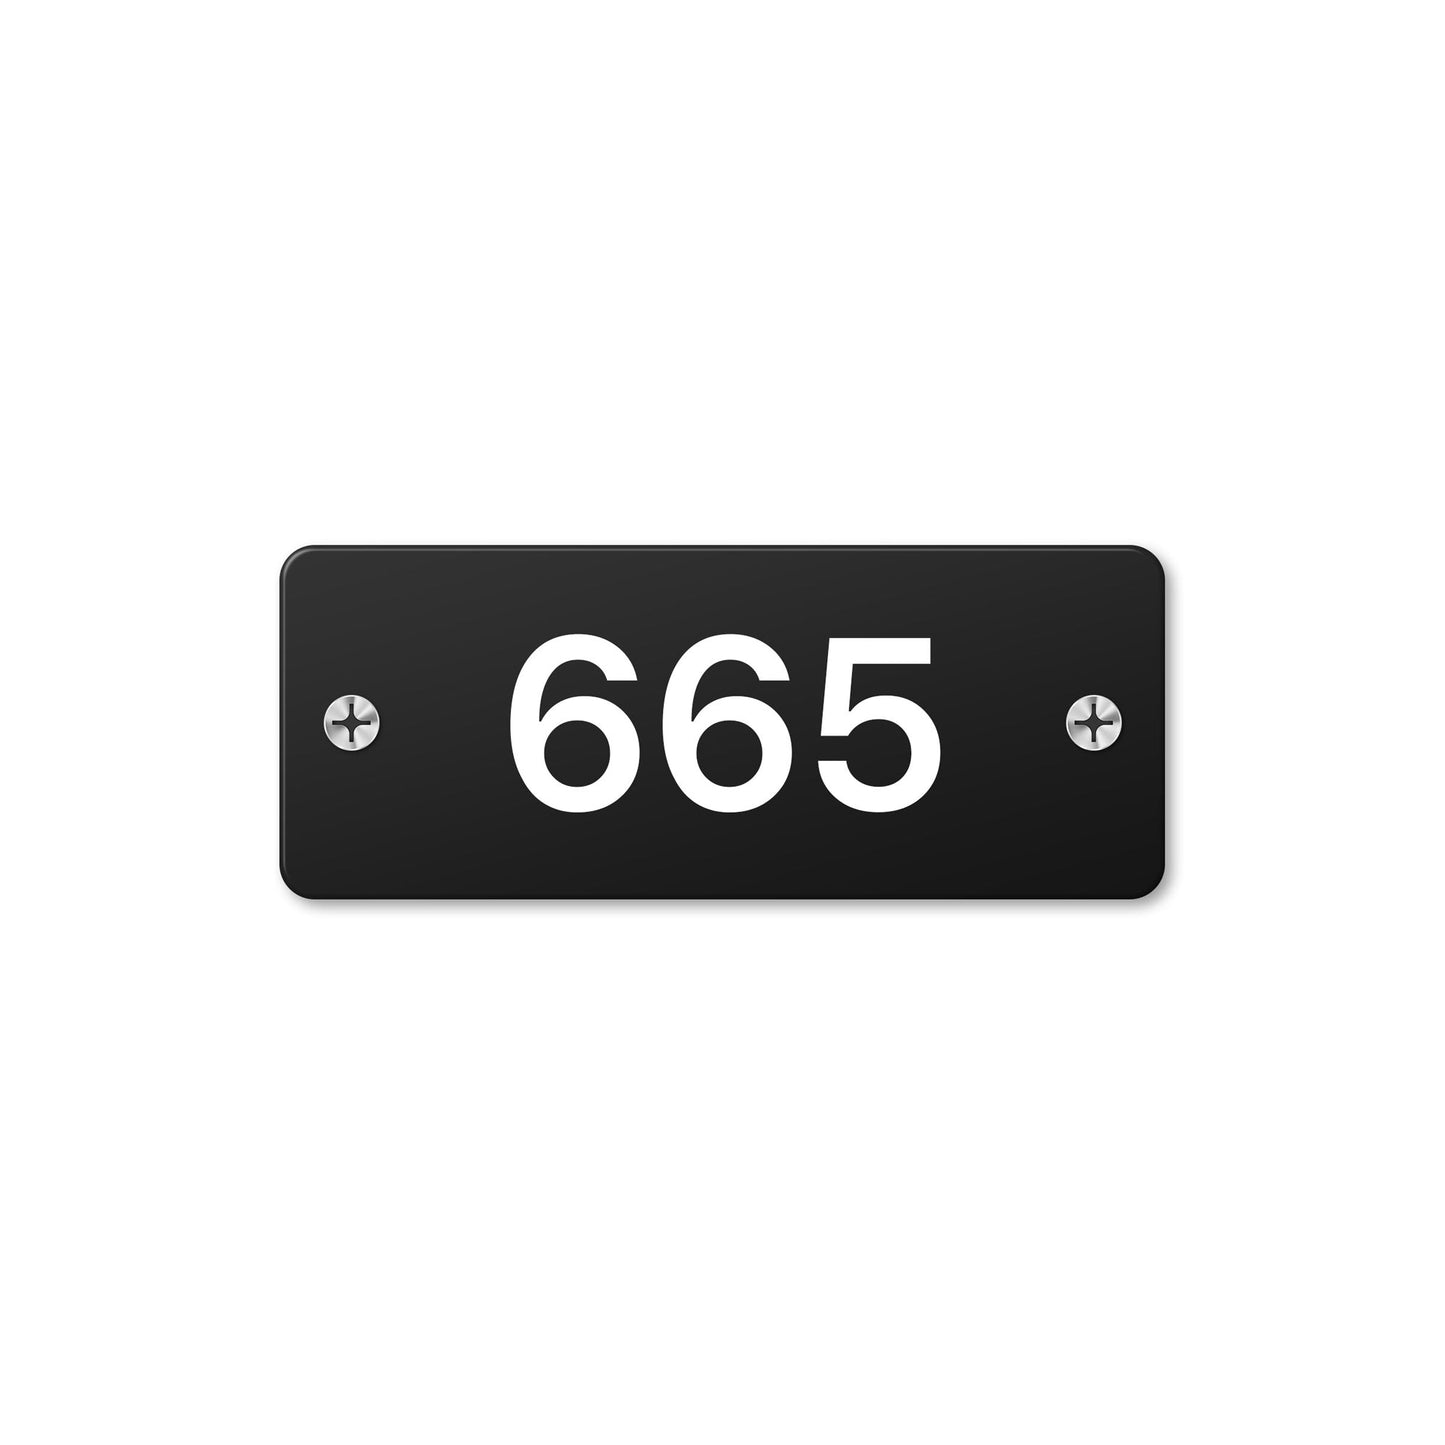 Numeral 665